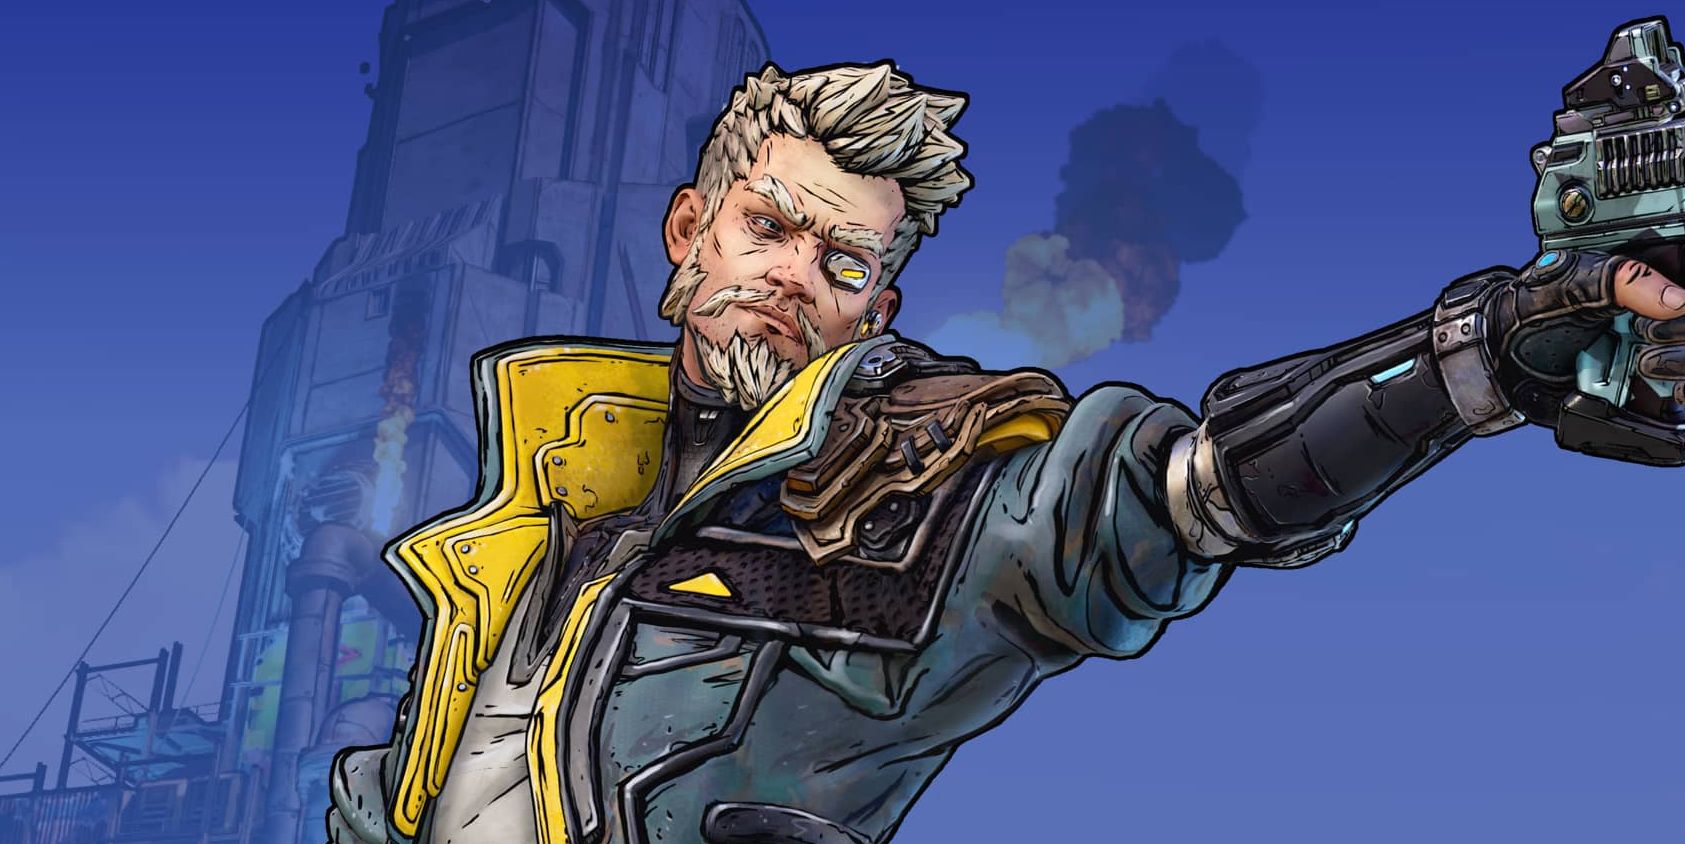 Image for Borderlands 3: here's a breakdown of the Skill Tree for Zane, the Operative Class